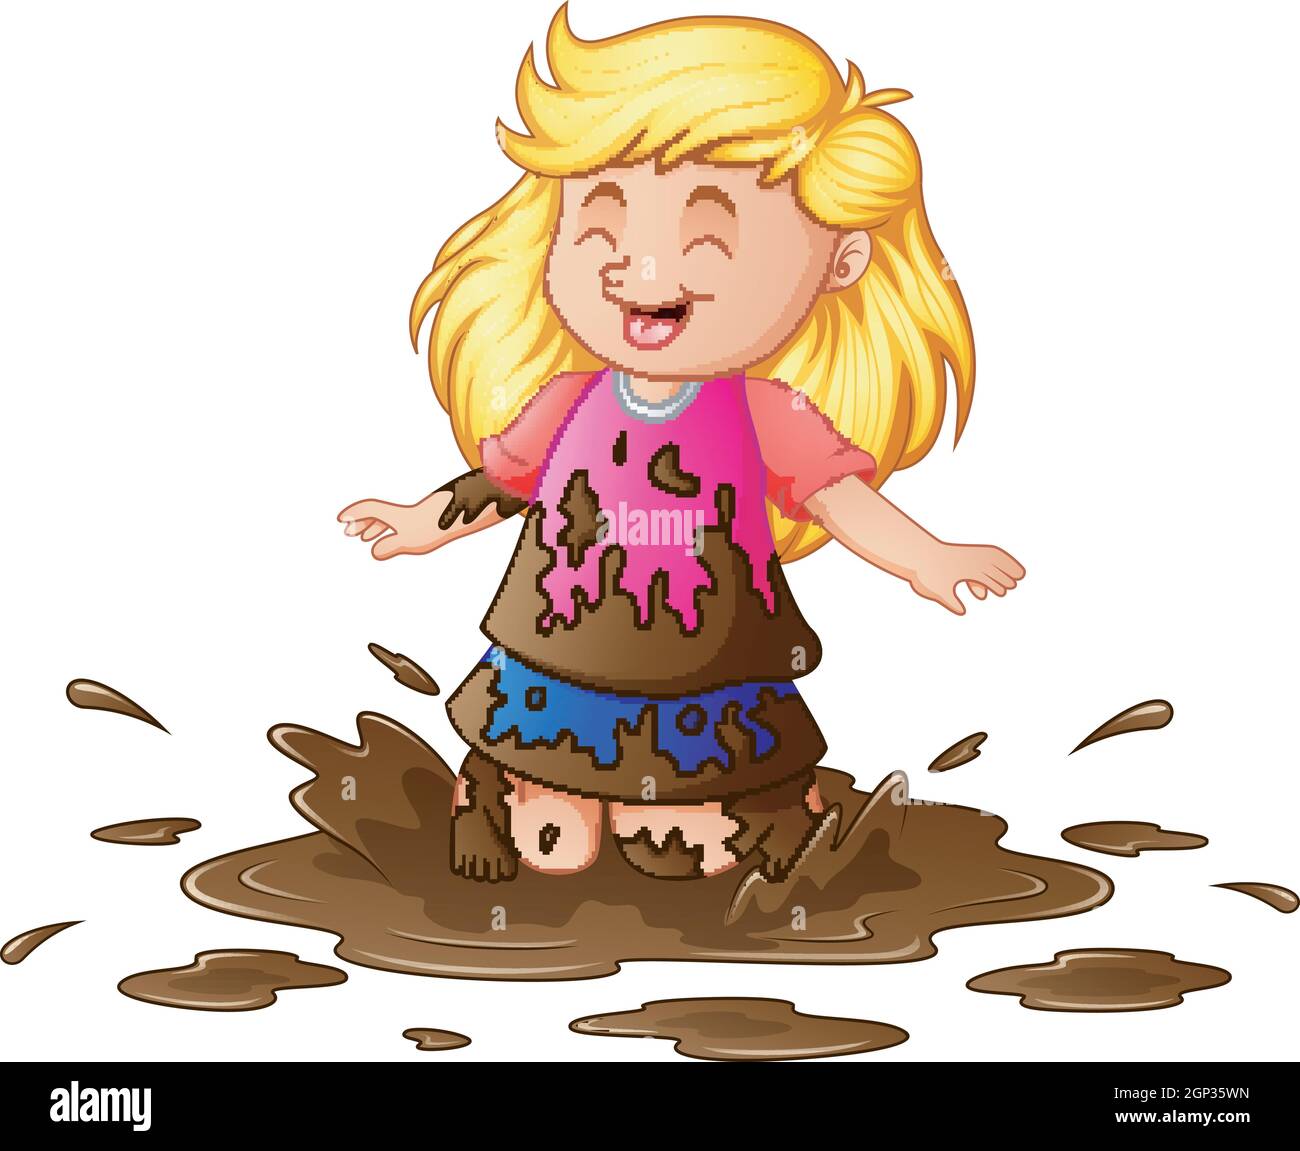 Vector illustration of Little girl playing in the mud Stock Vector